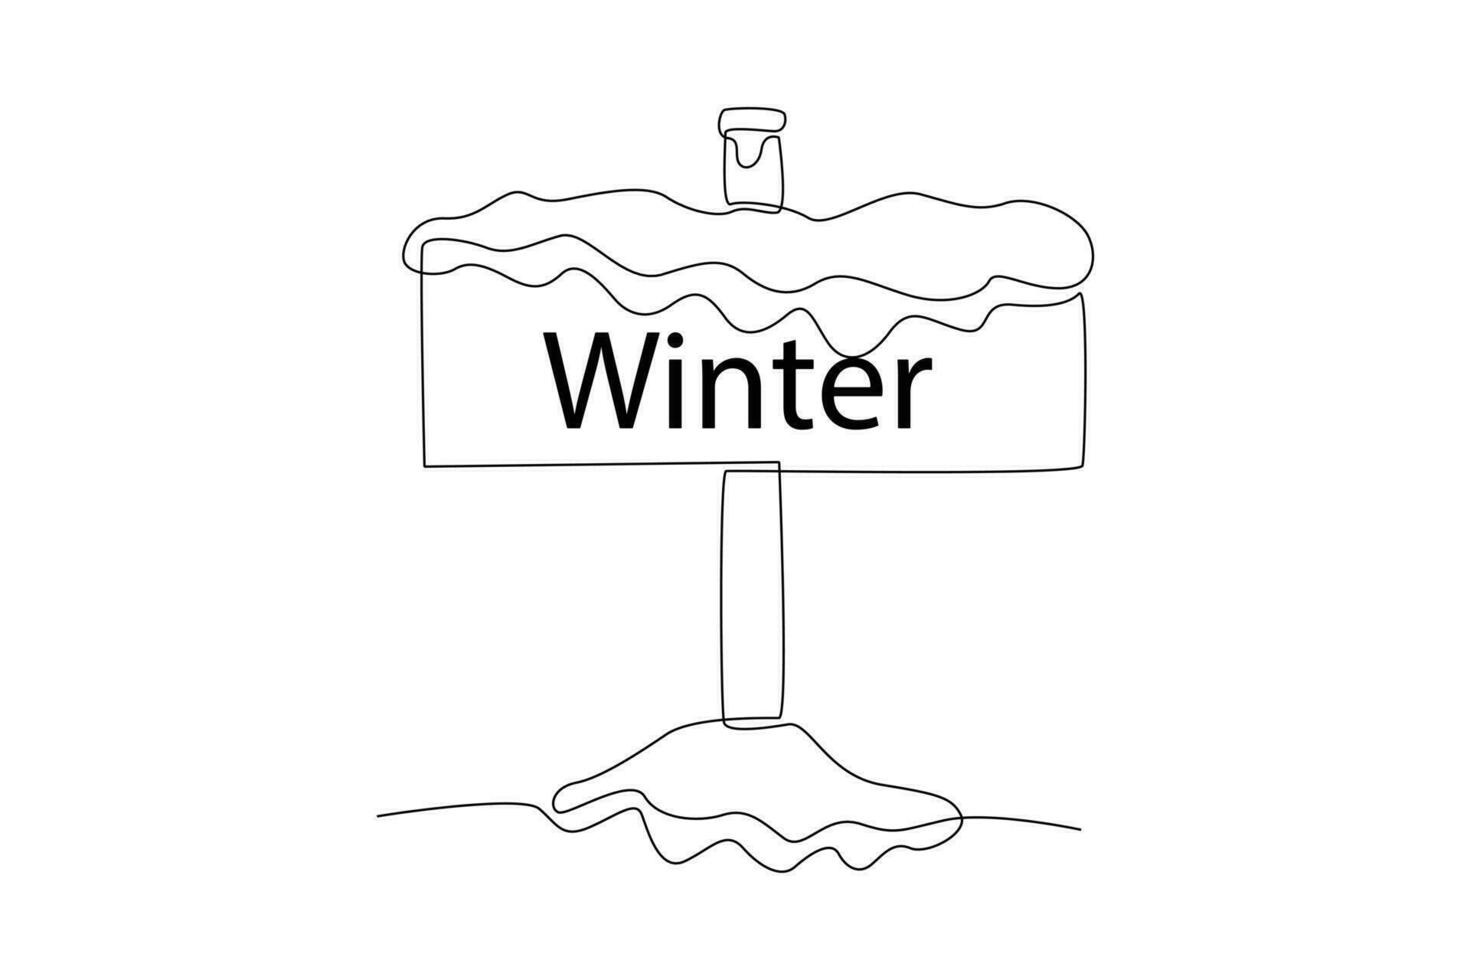 Continuous one line drawing Winter activities. Winter concept. Doodle vector illustration.